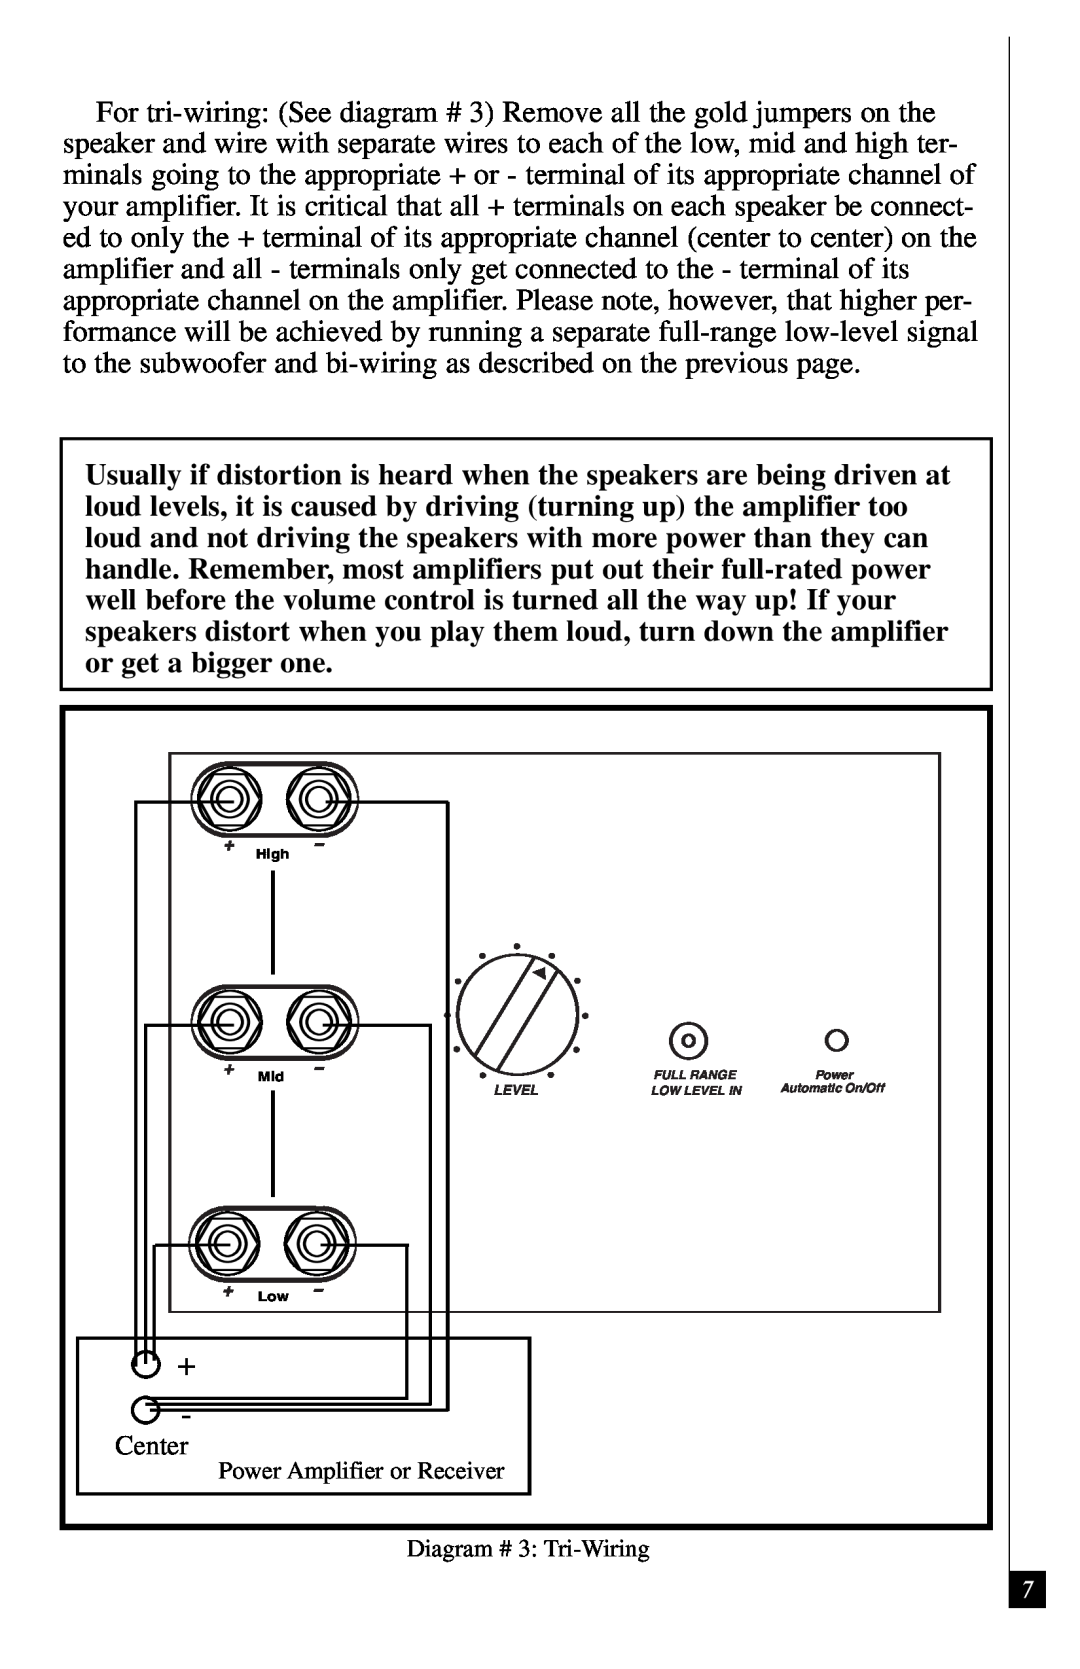 Definitive Technology 2500 owner manual Diagram # 3 Tri-Wiring 